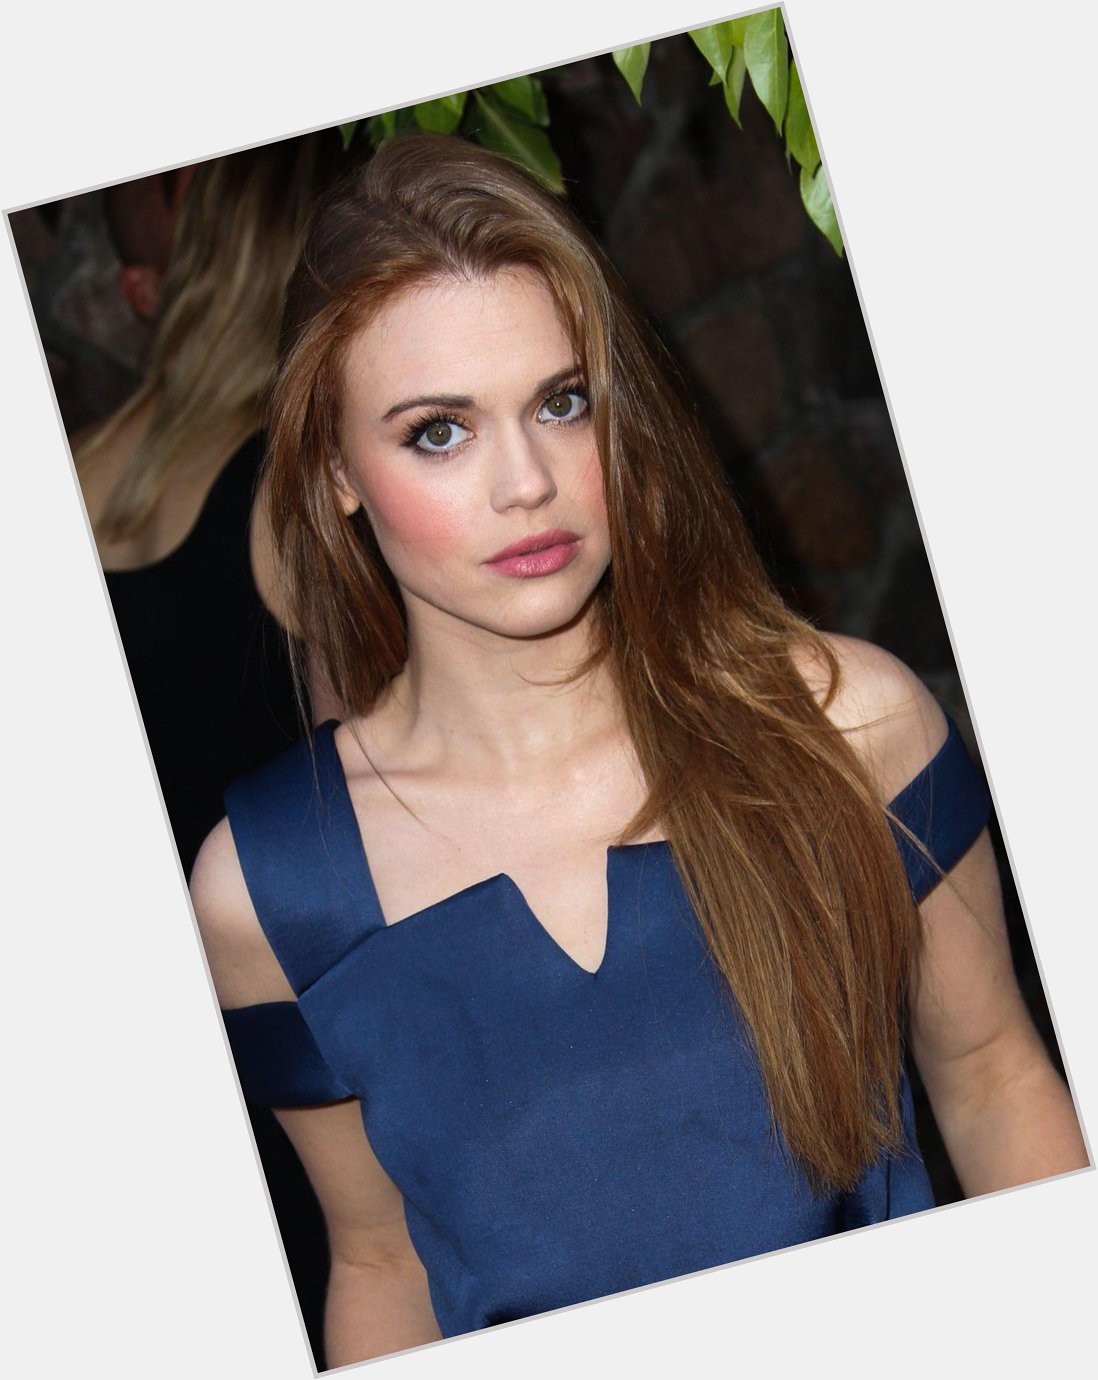  HAPPY 28TH BIRTHDAY HOLLAND RODEN ! I love you so much!              